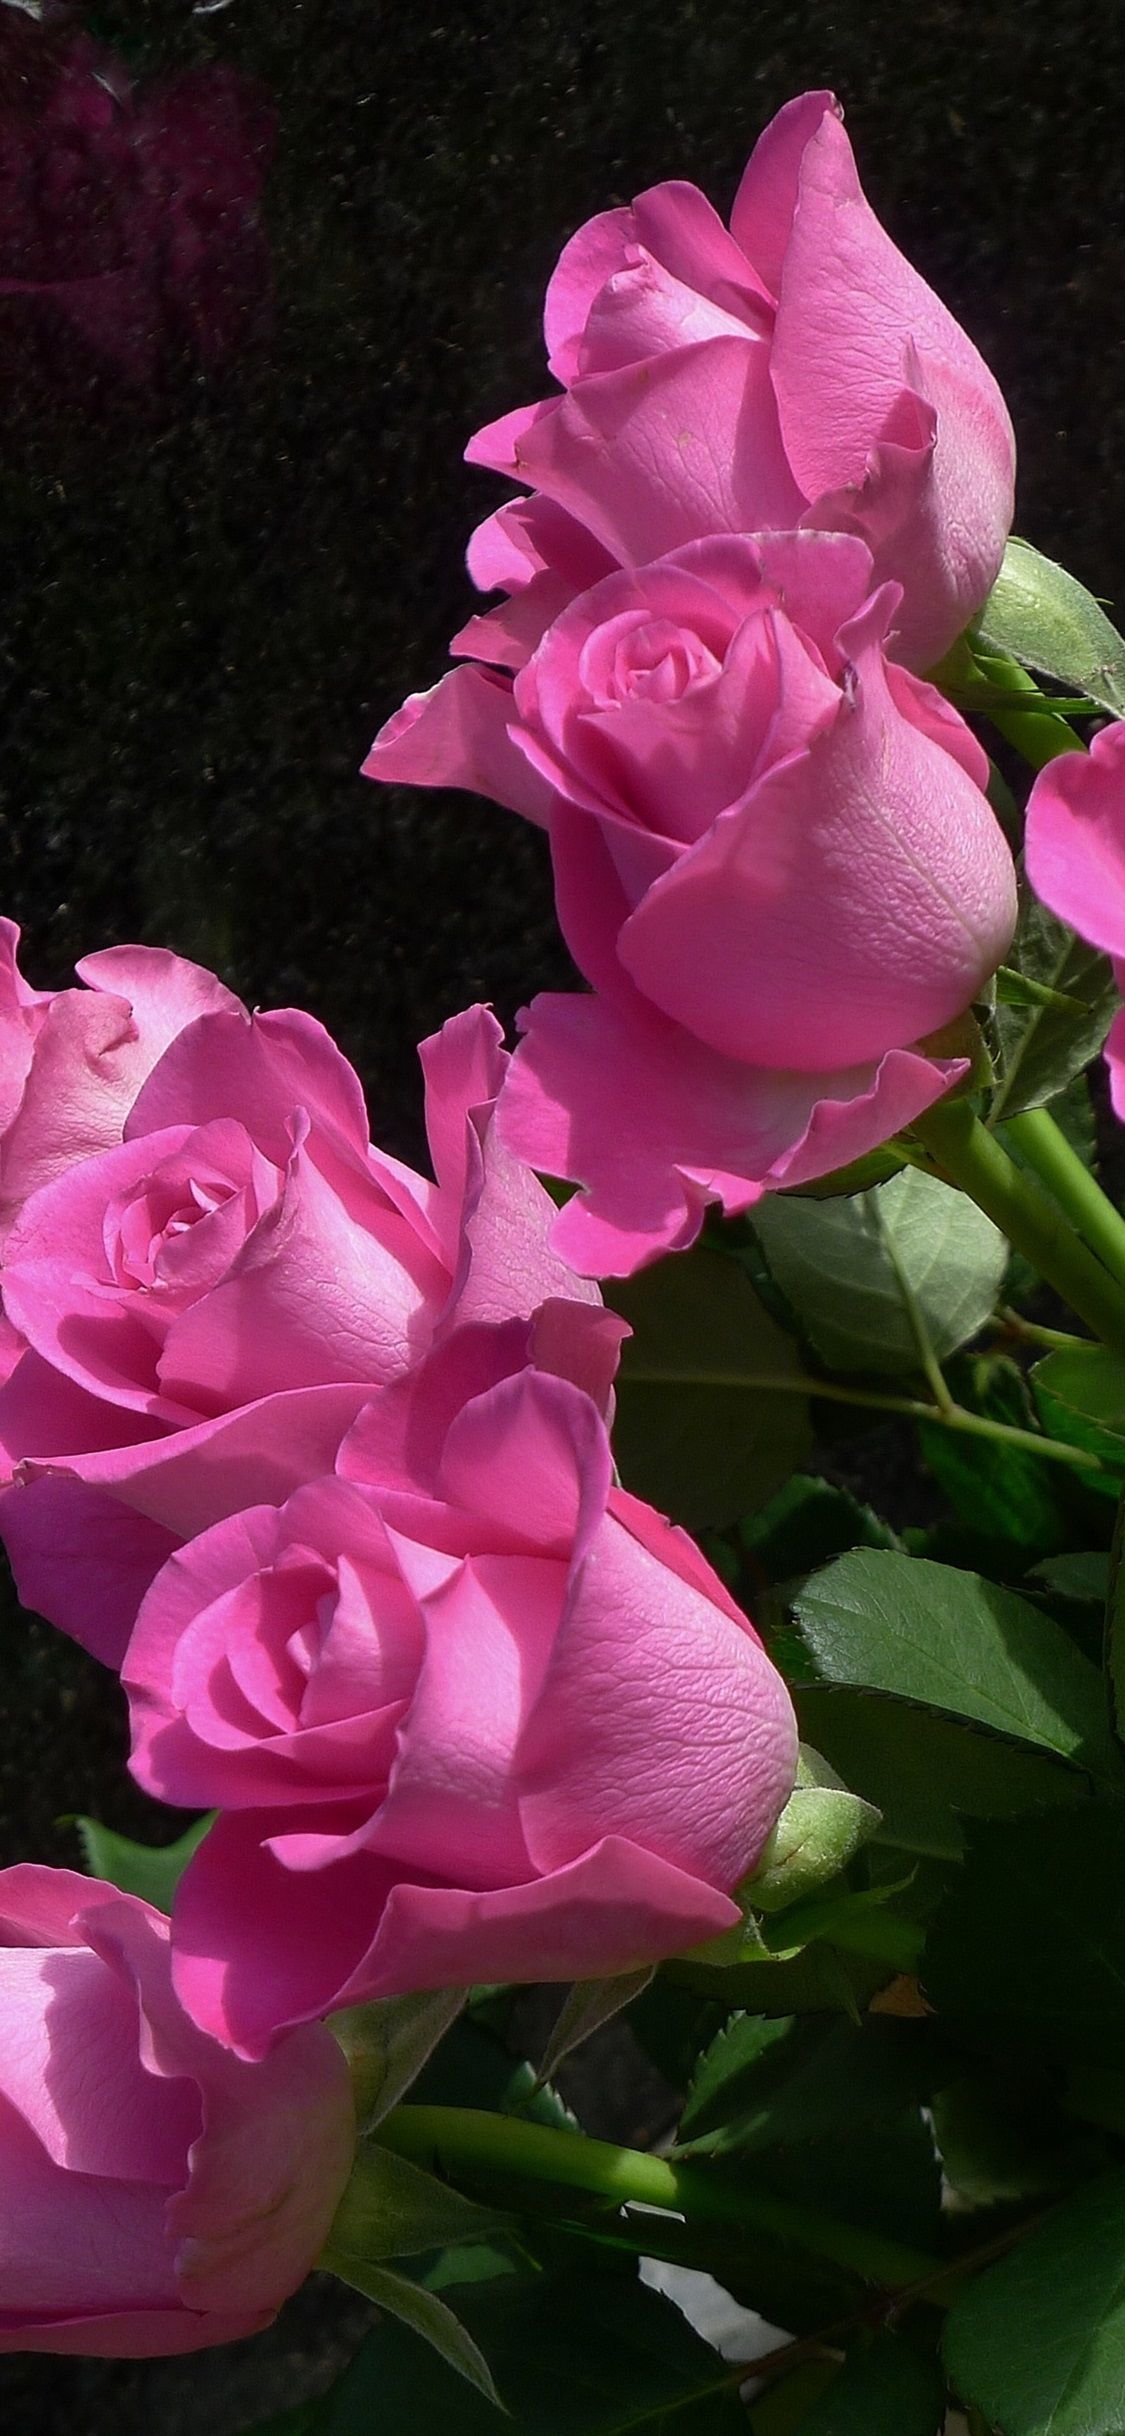 Light Dark Pink Roses With Black Stones And Water Drops 4K HD Rose  Wallpapers  HD Wallpapers  ID 62937